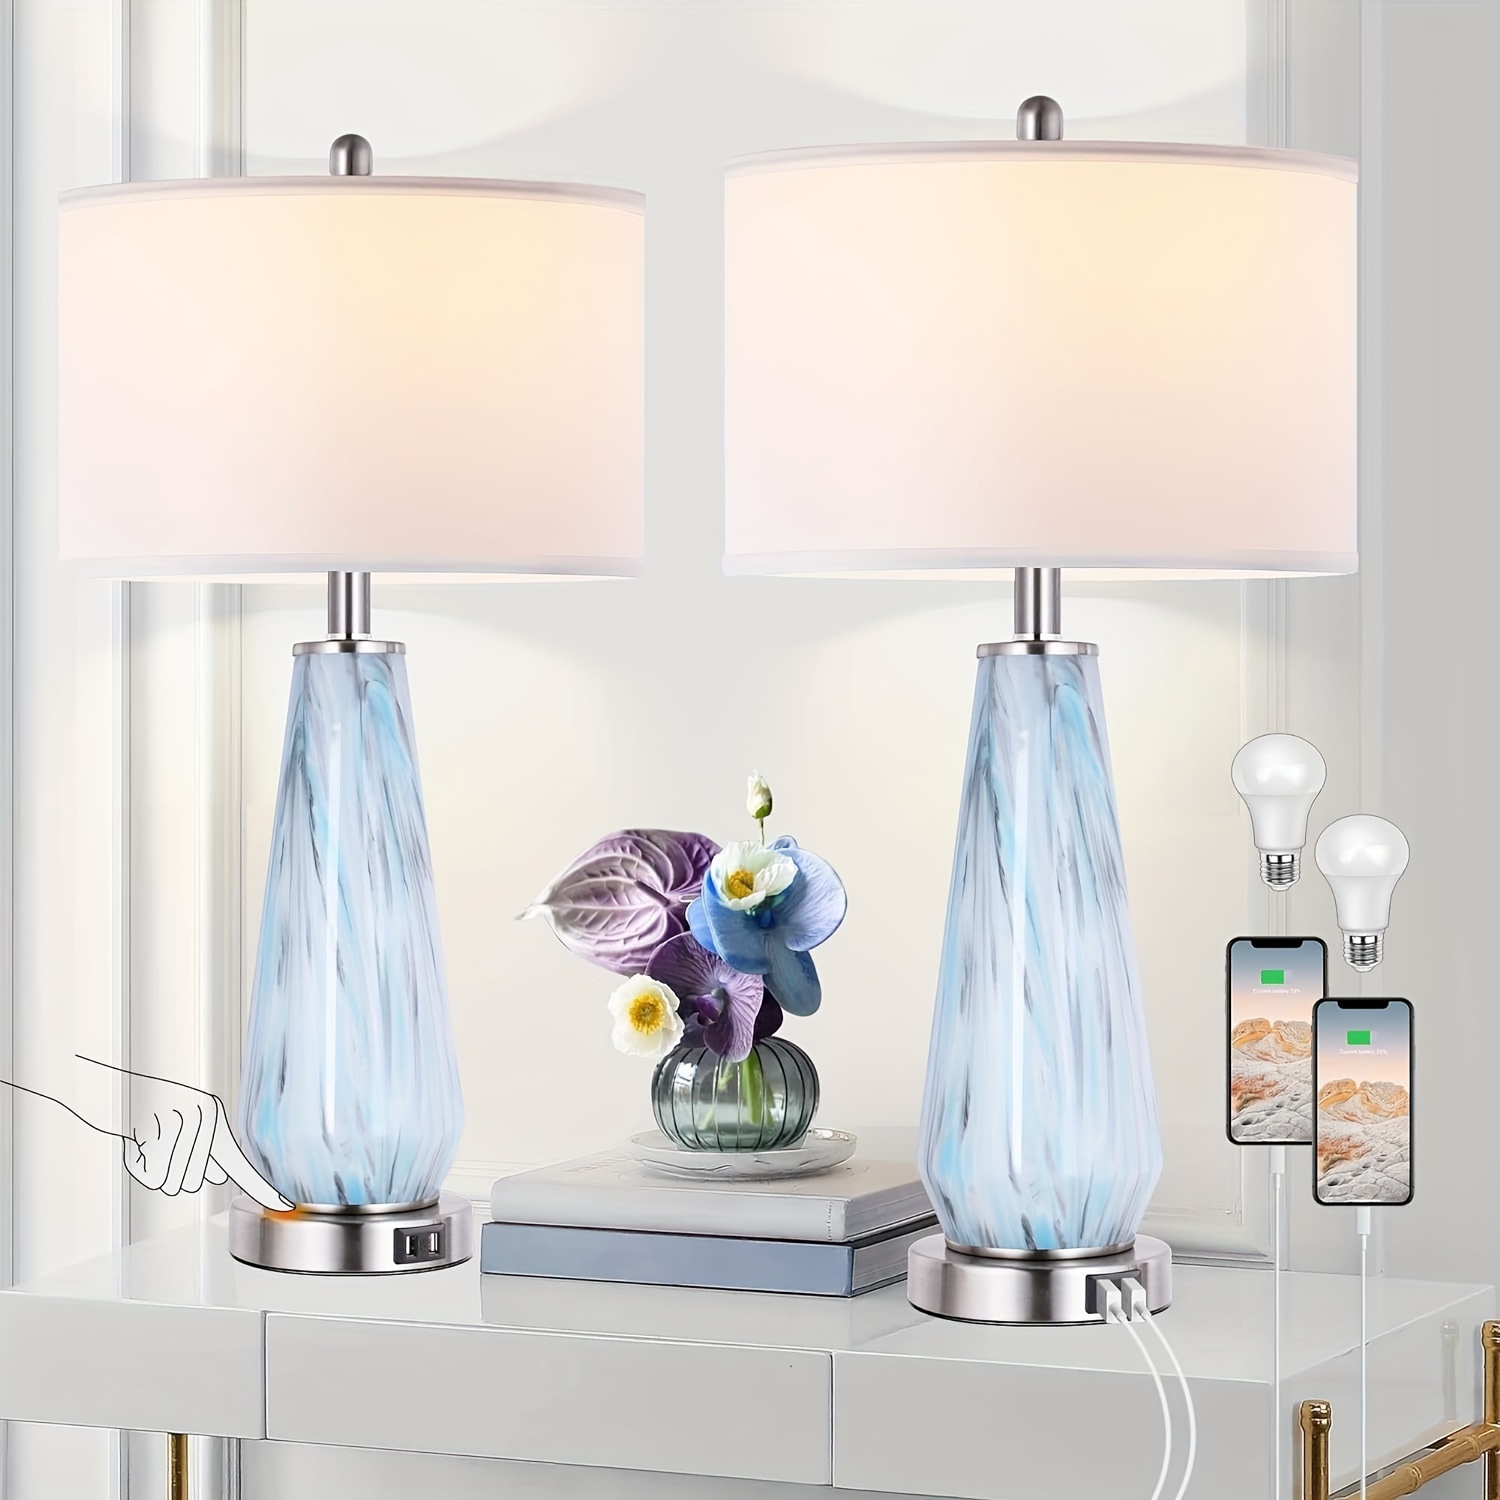 

Modern Table Lamp Set Of 2 Touch Control, 27" Tall Faded Swirl Blue Gray Art Glass Bedside Lamp With Usb Ports, 3-way Dimmable Hand Crafted Nightstand Lamps White Drum Shade For Living Room, Bedroom